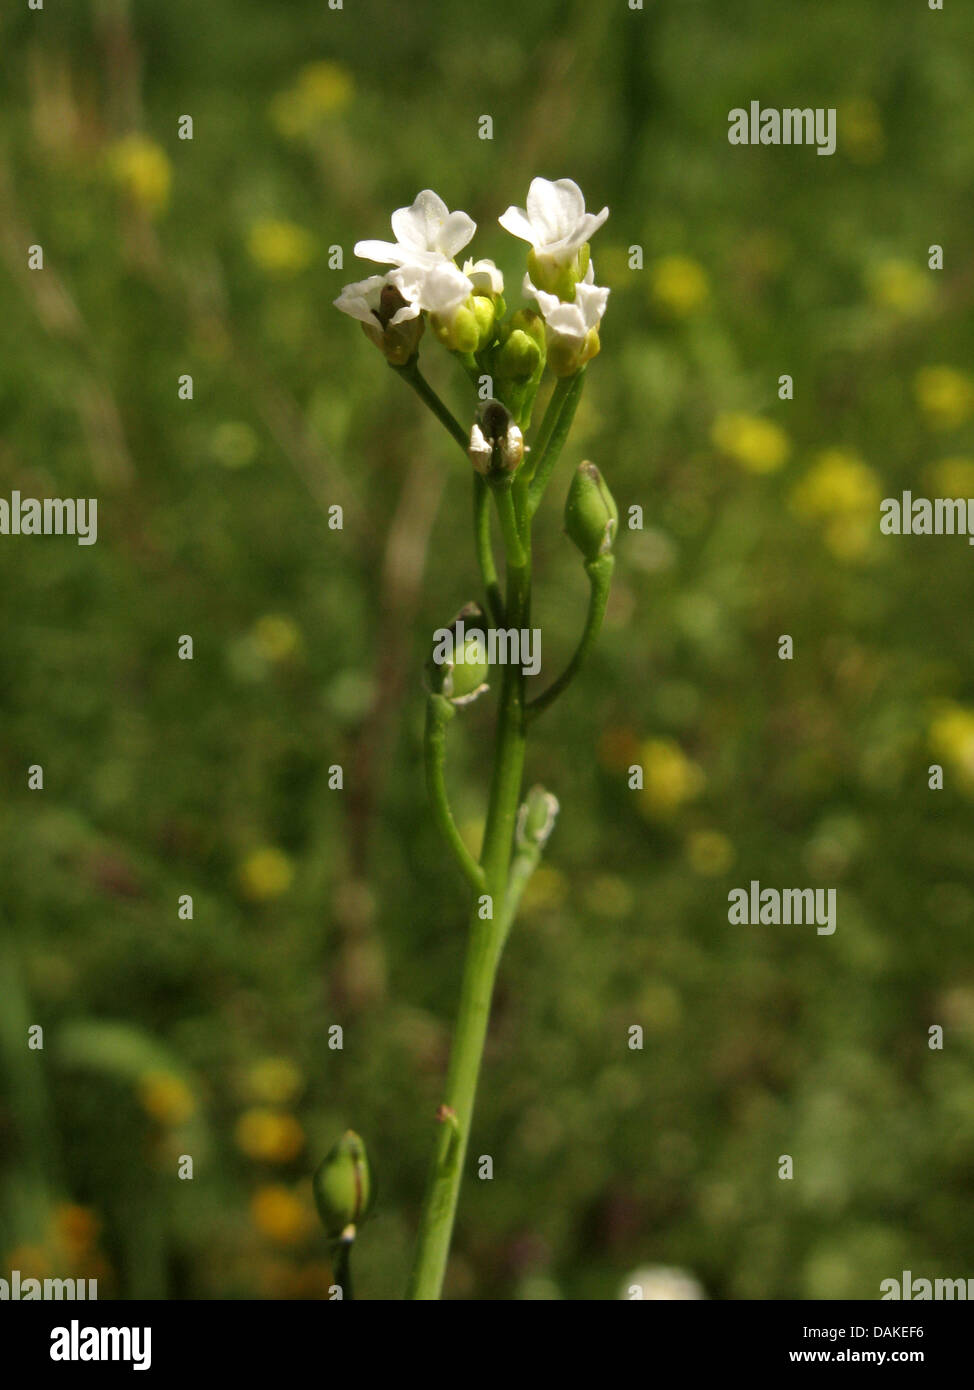 Calepina, White ball-mustard (Calepina irregularis), with flowers and fruits, Greece, Peloponnese Stock Photo